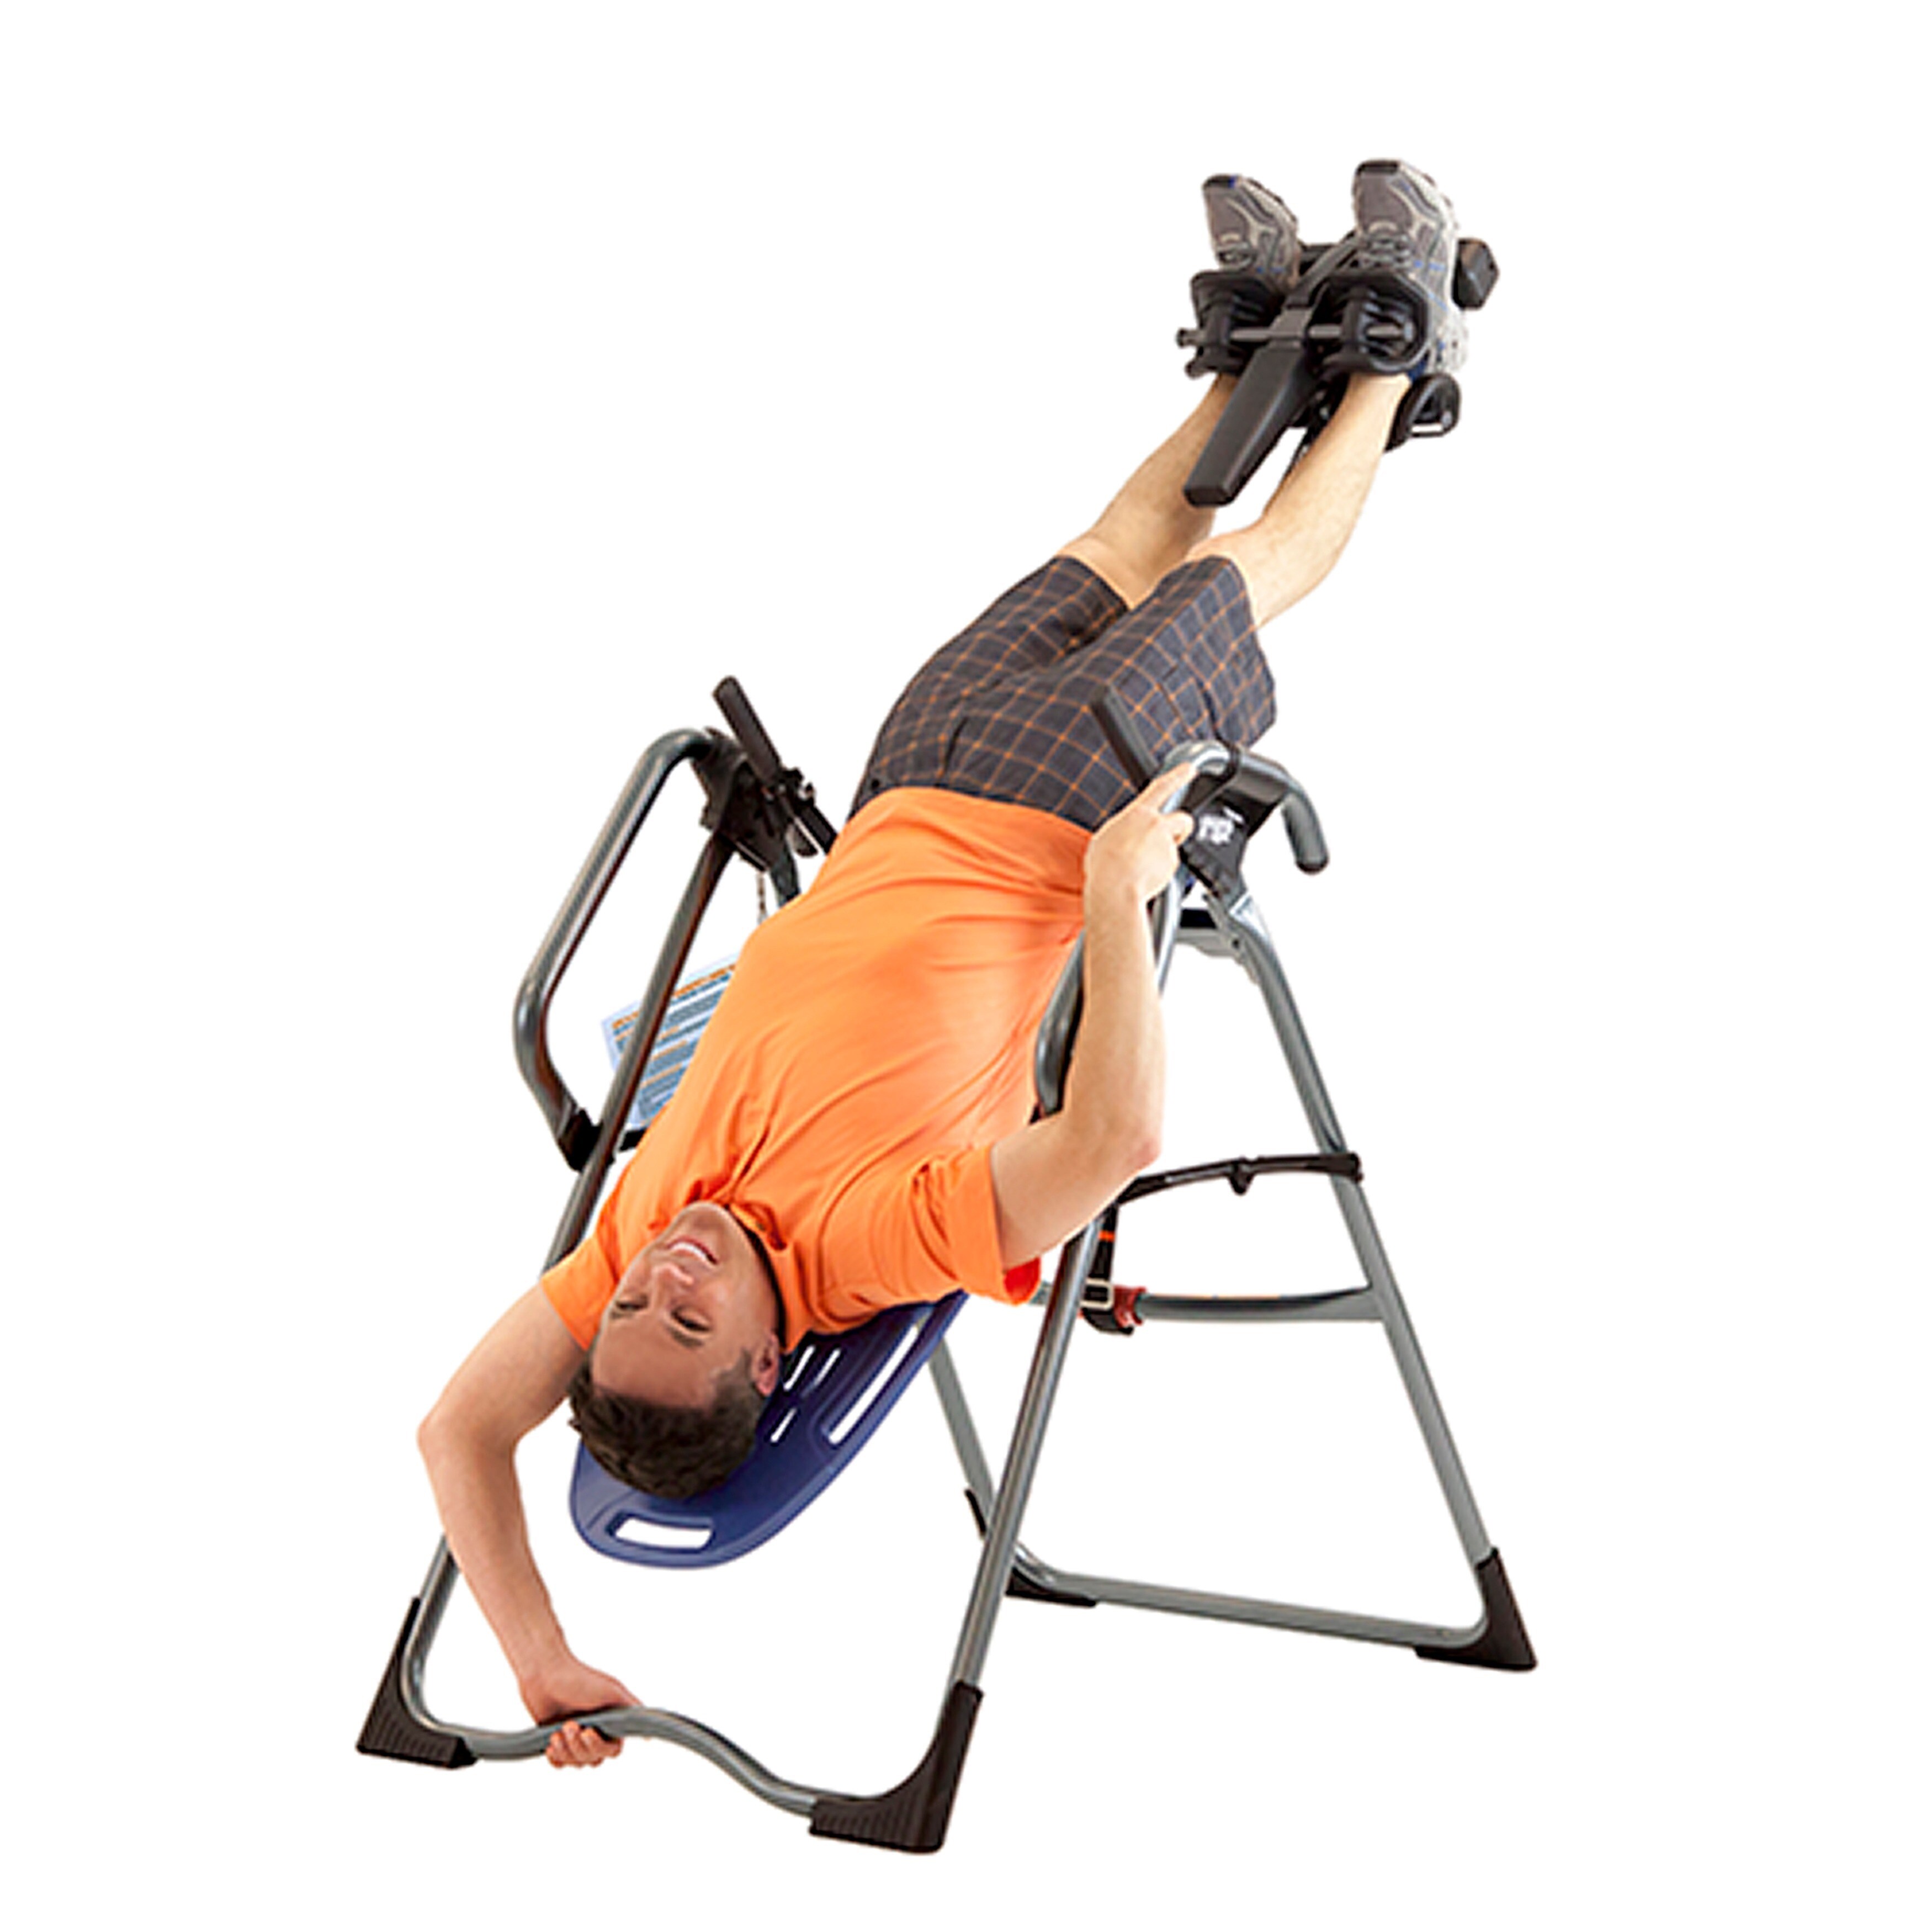 Sport Exercise Equipment Teeter EP 960 Inversion Table With Back Pain.